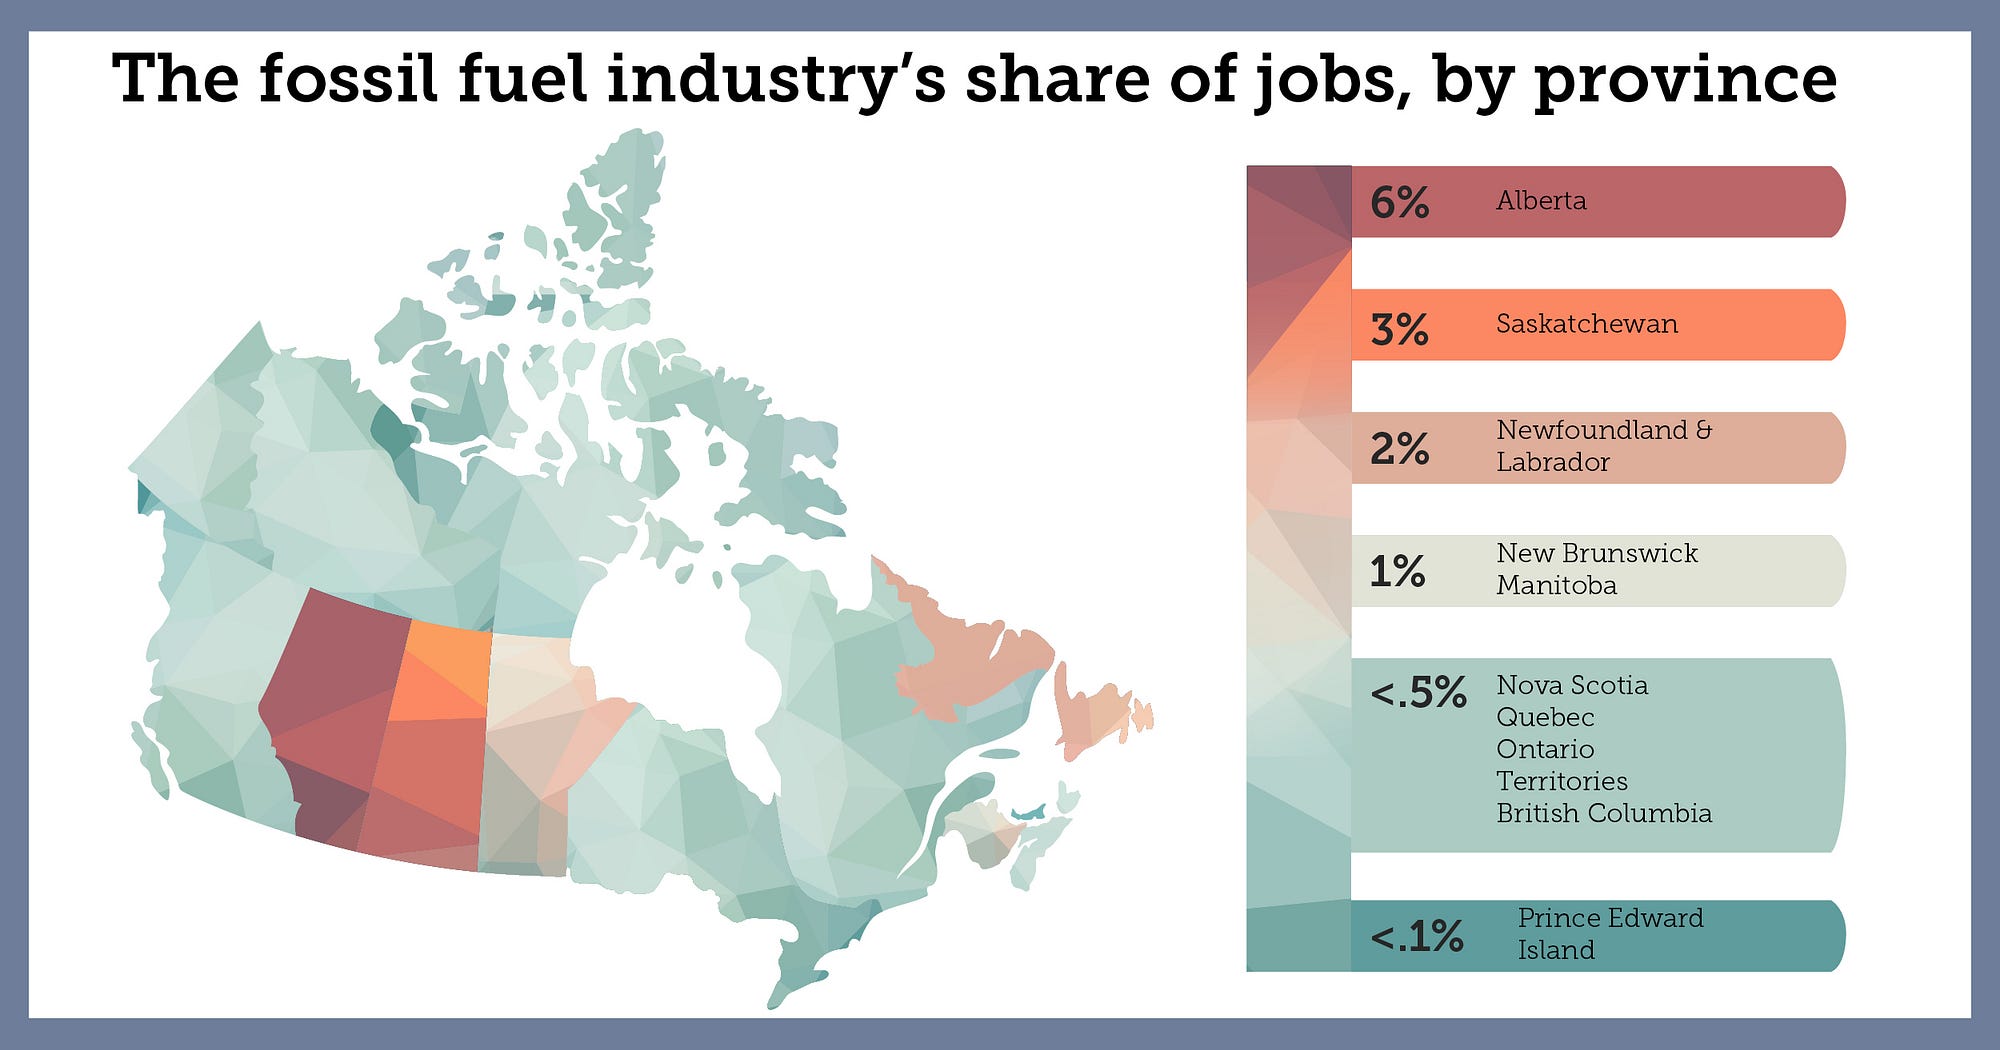 Map of Canada showing the fossil fuel industry's share of jobs by province. The greatest share of jobs is in Alberta (6%) Saskatchewan (3%) and Newfoundland and Labrador (2%)